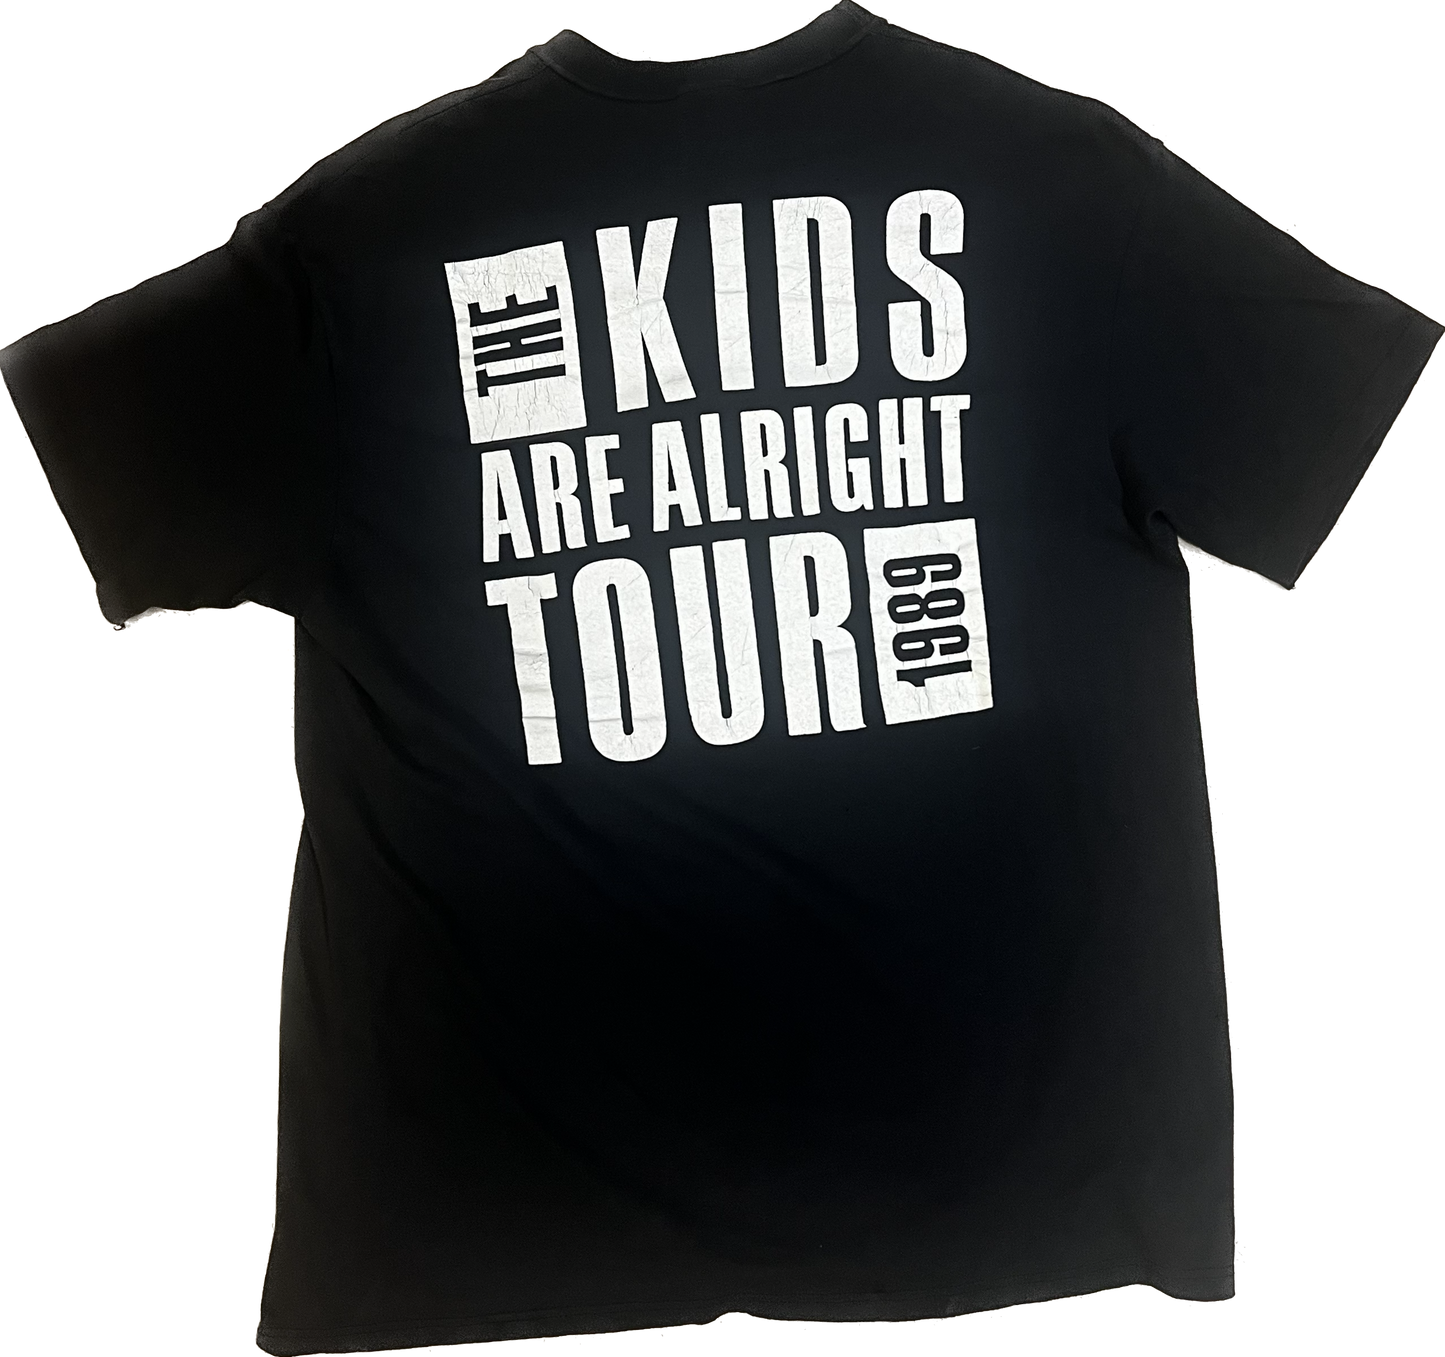 1989 Vintage The Who "The Kids Are Alright" tour band T-shirt